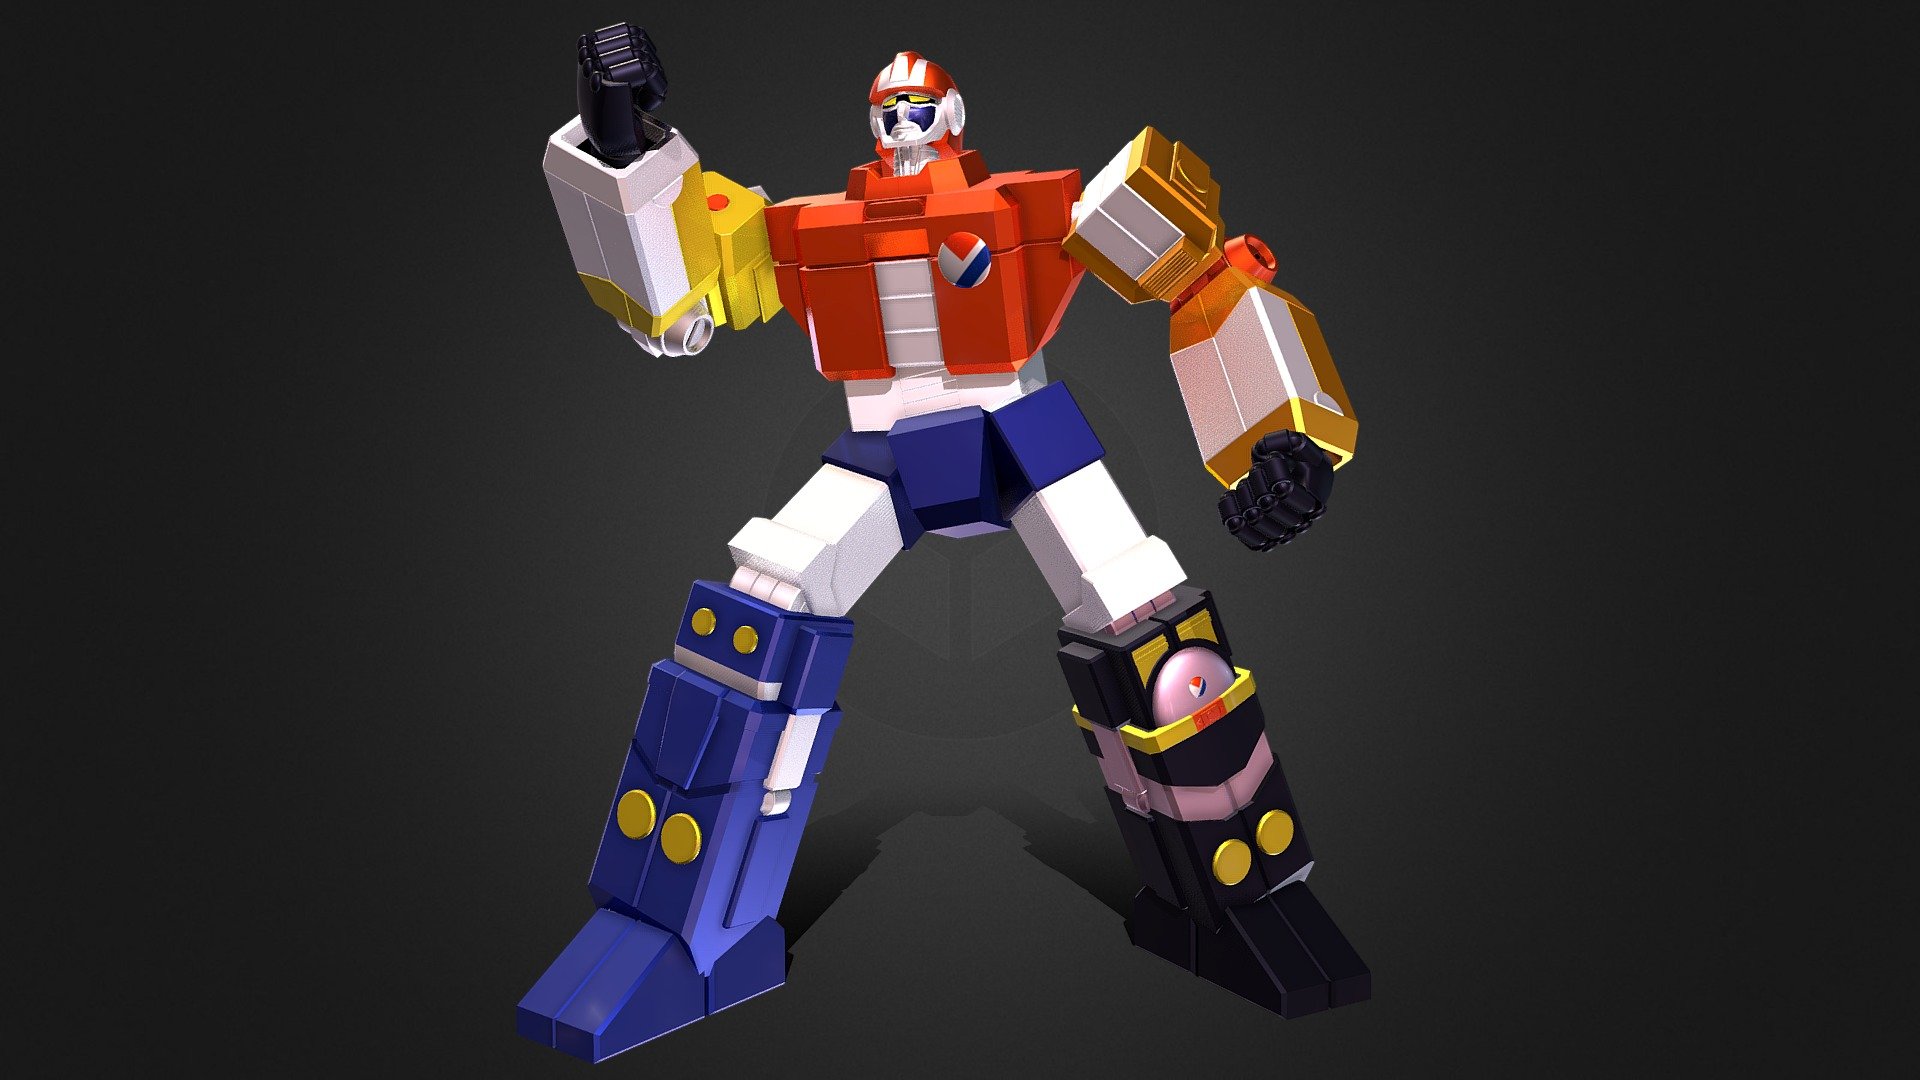 If you're interested in purchasing any of my models, contact me @ andrewdisaacs@yahoo.com

Mighty Orbots, the combining robot from the series of the same name.  Not Godmars.

Made by myself in 3DS Max 3d model